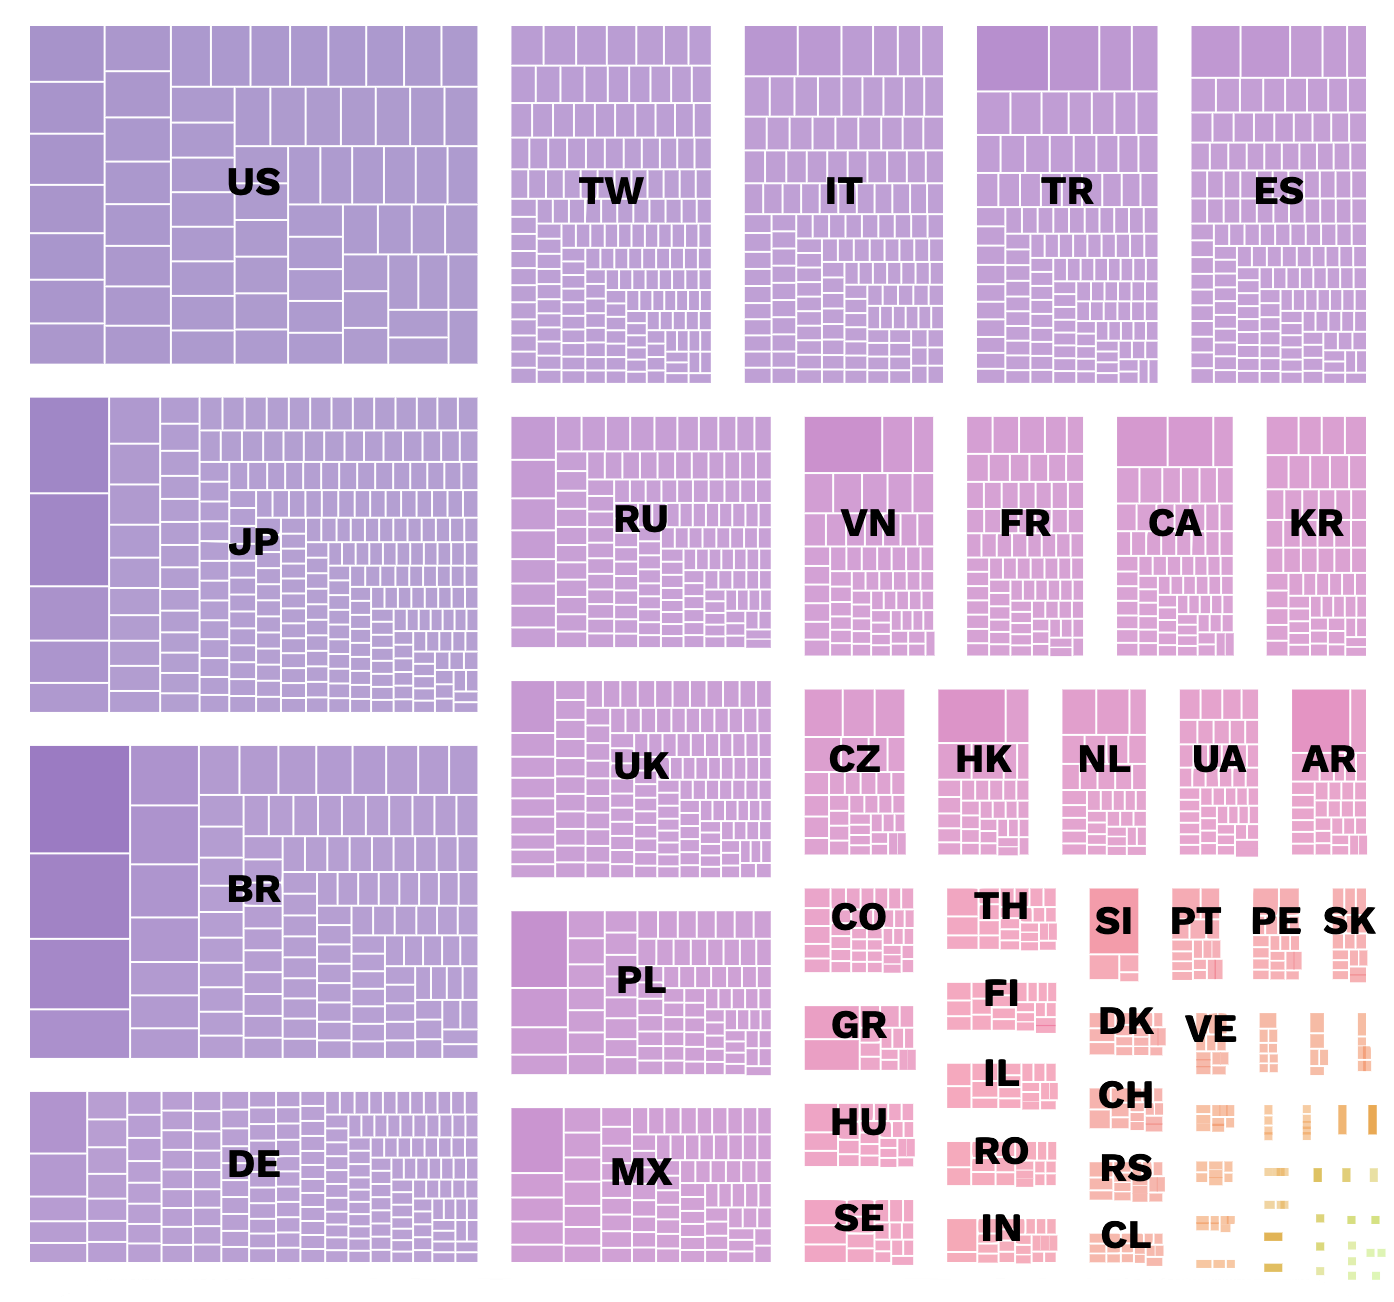 a treemap chart of different squares, each bigger square being labelled with a country name.